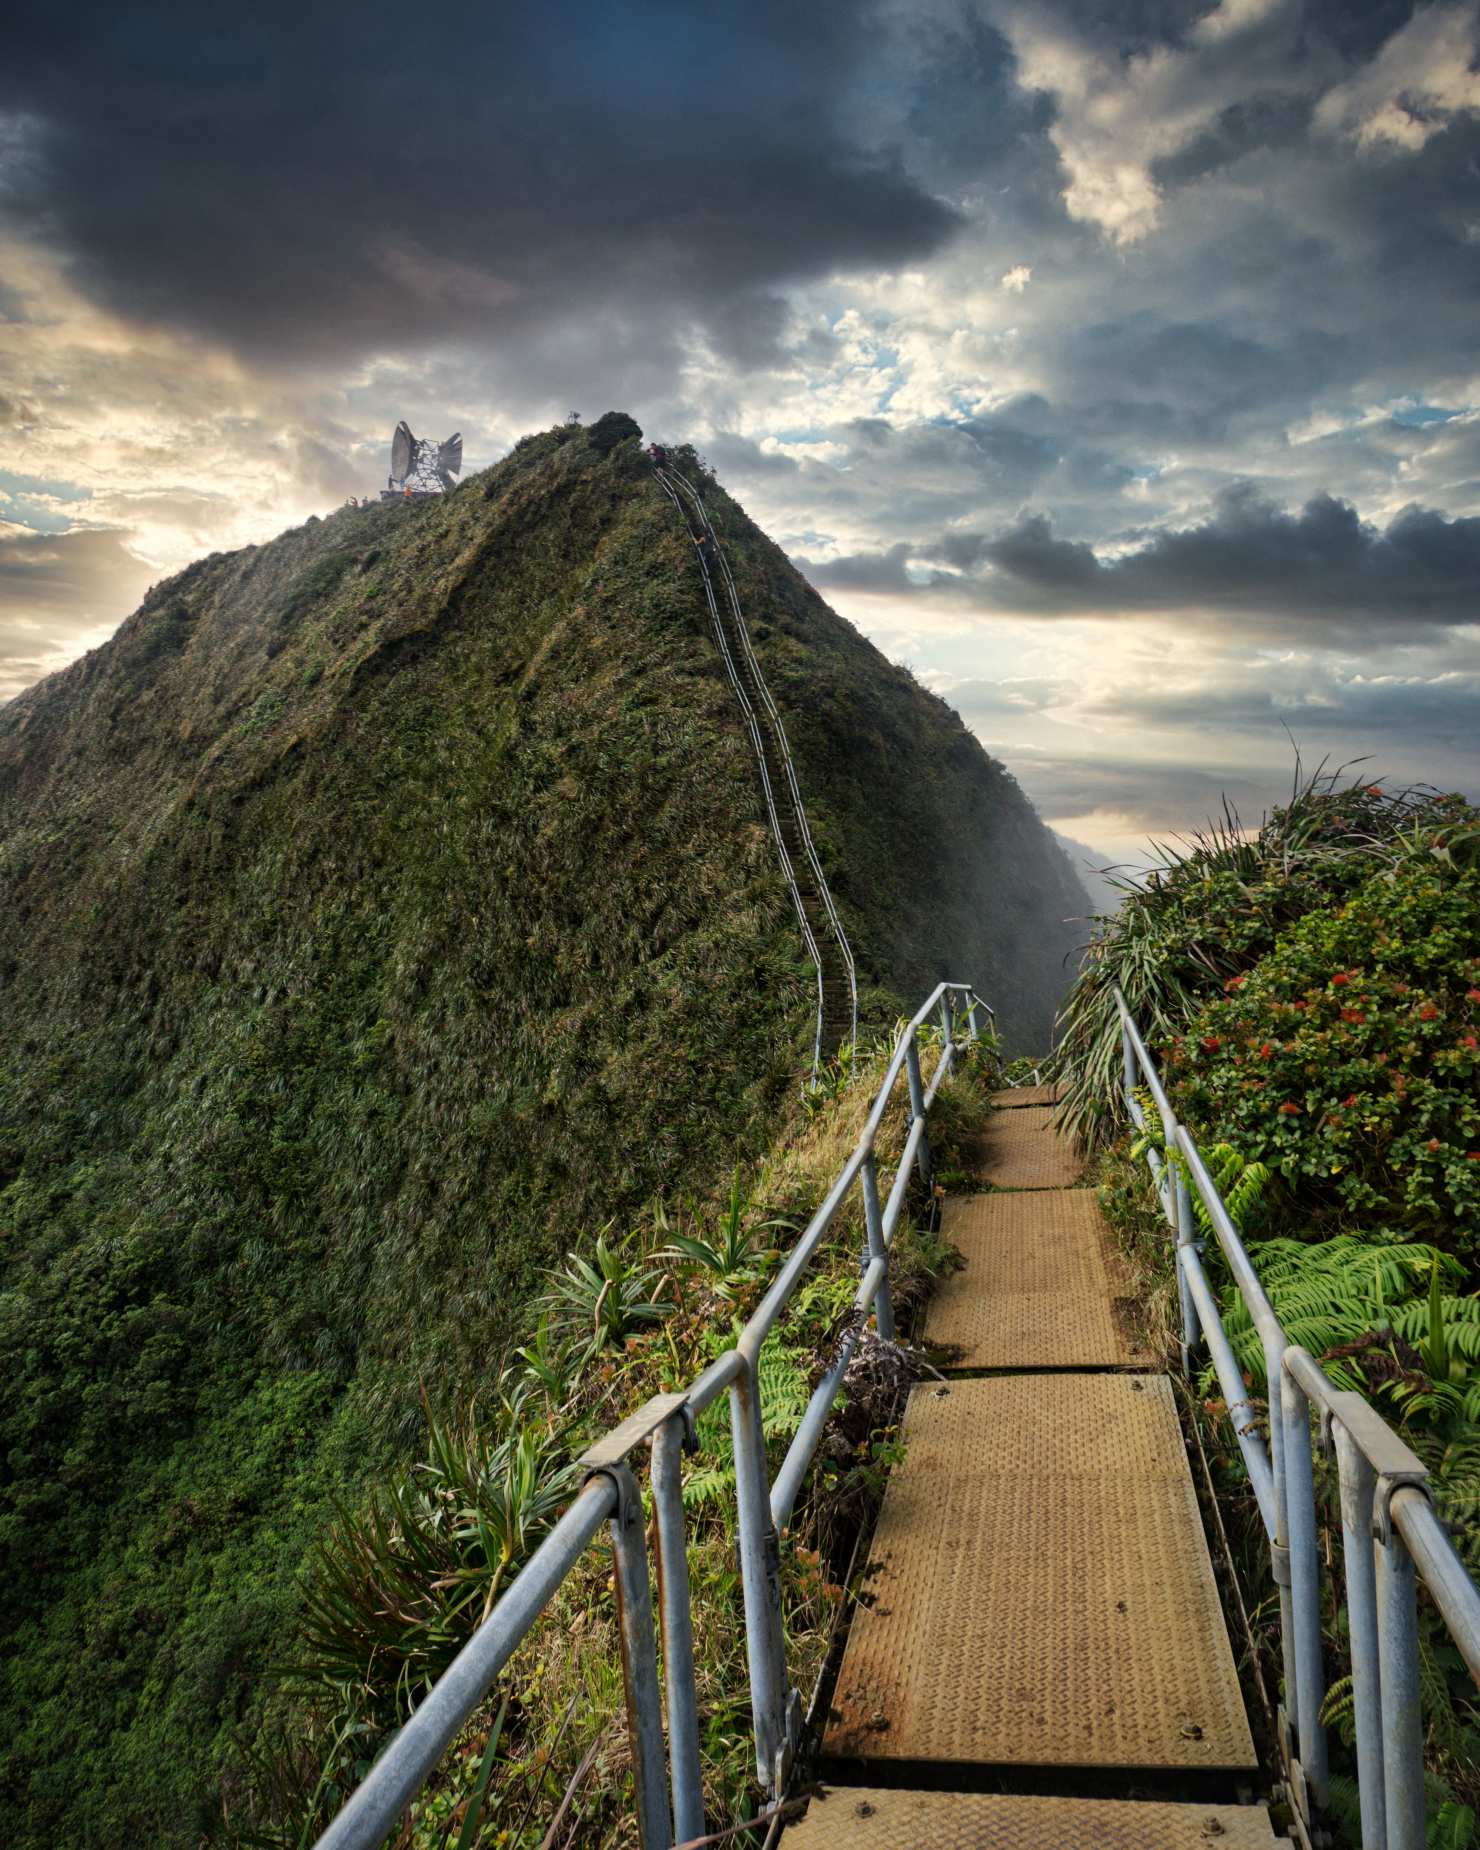 The Haiku Stairs, also referred to as the "Stairway to Heaven," is a treacherous and alluring steel structure comprising 3,922 steps. Originally constructed in 1942, the stairs provided access to the top-secret Haʻikū Radio Station, a U.S. Navy communication facility during World War II. These stairs span the majestic Ko'olau mountain range, offering breathtaking panoramic views of Kaneohe and Kaneohe Bay.